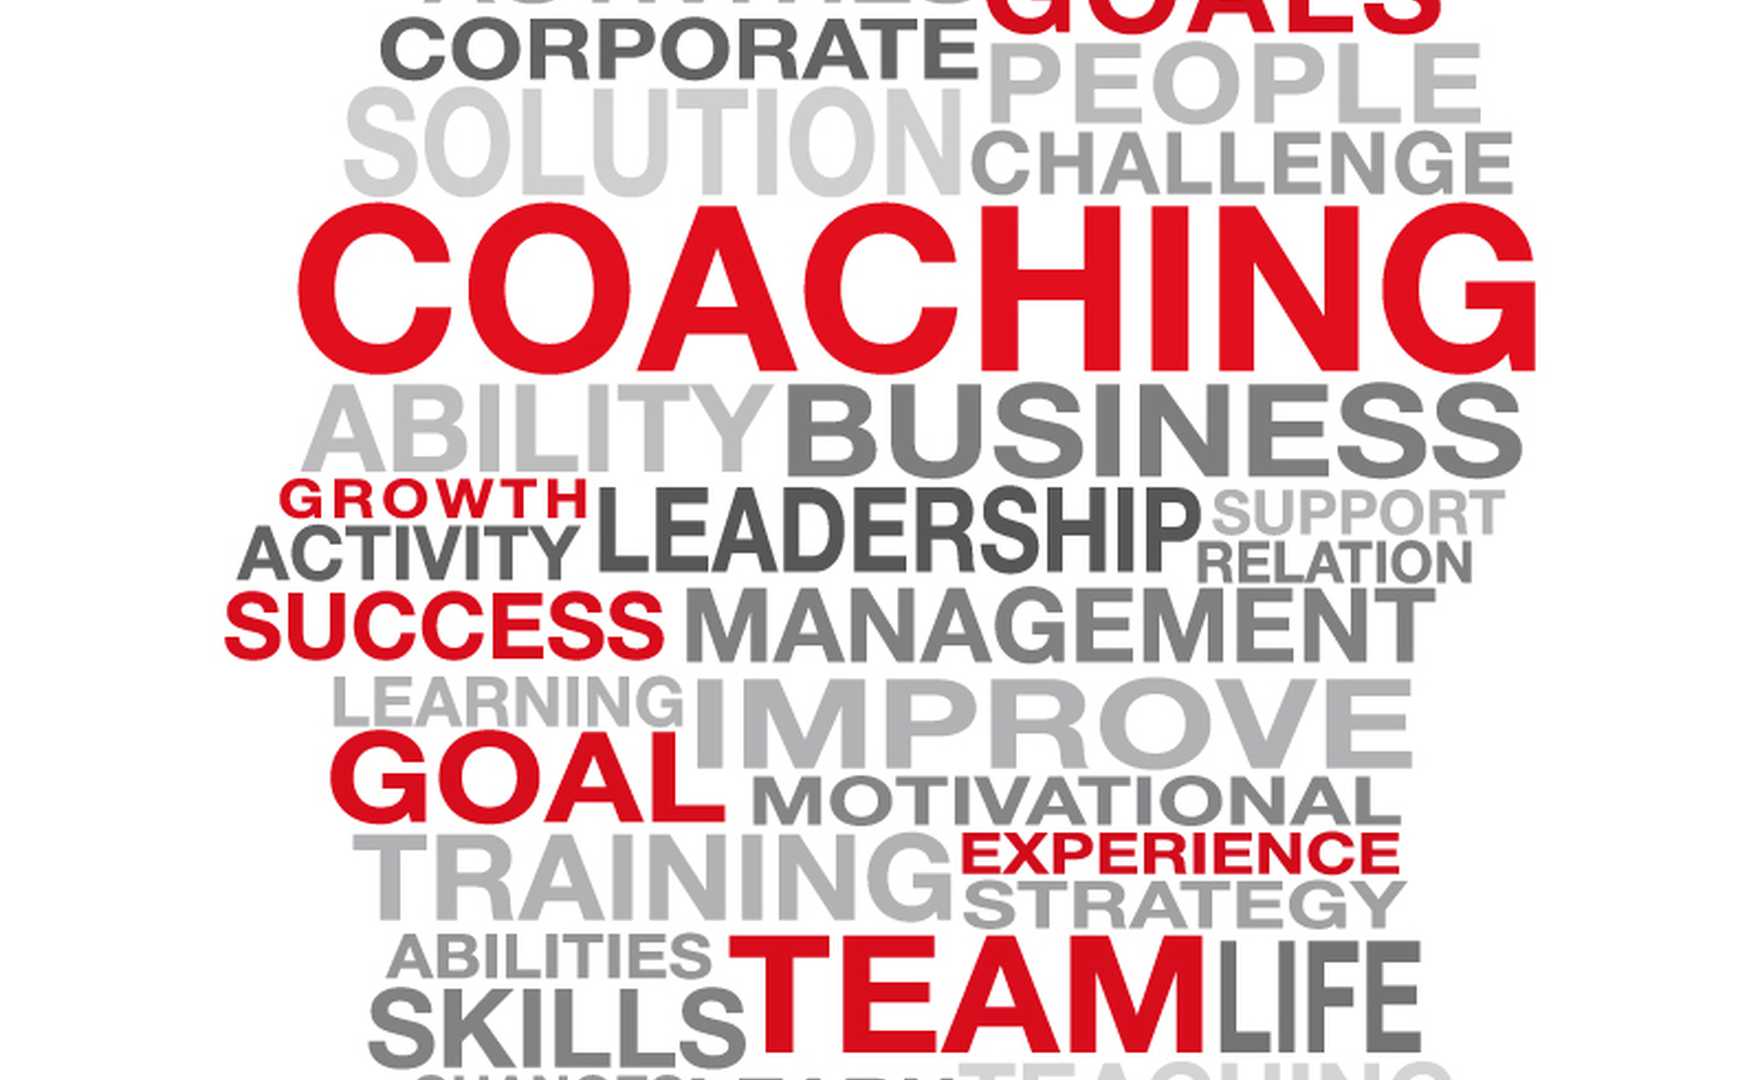 Five misconceptions about executive coaching